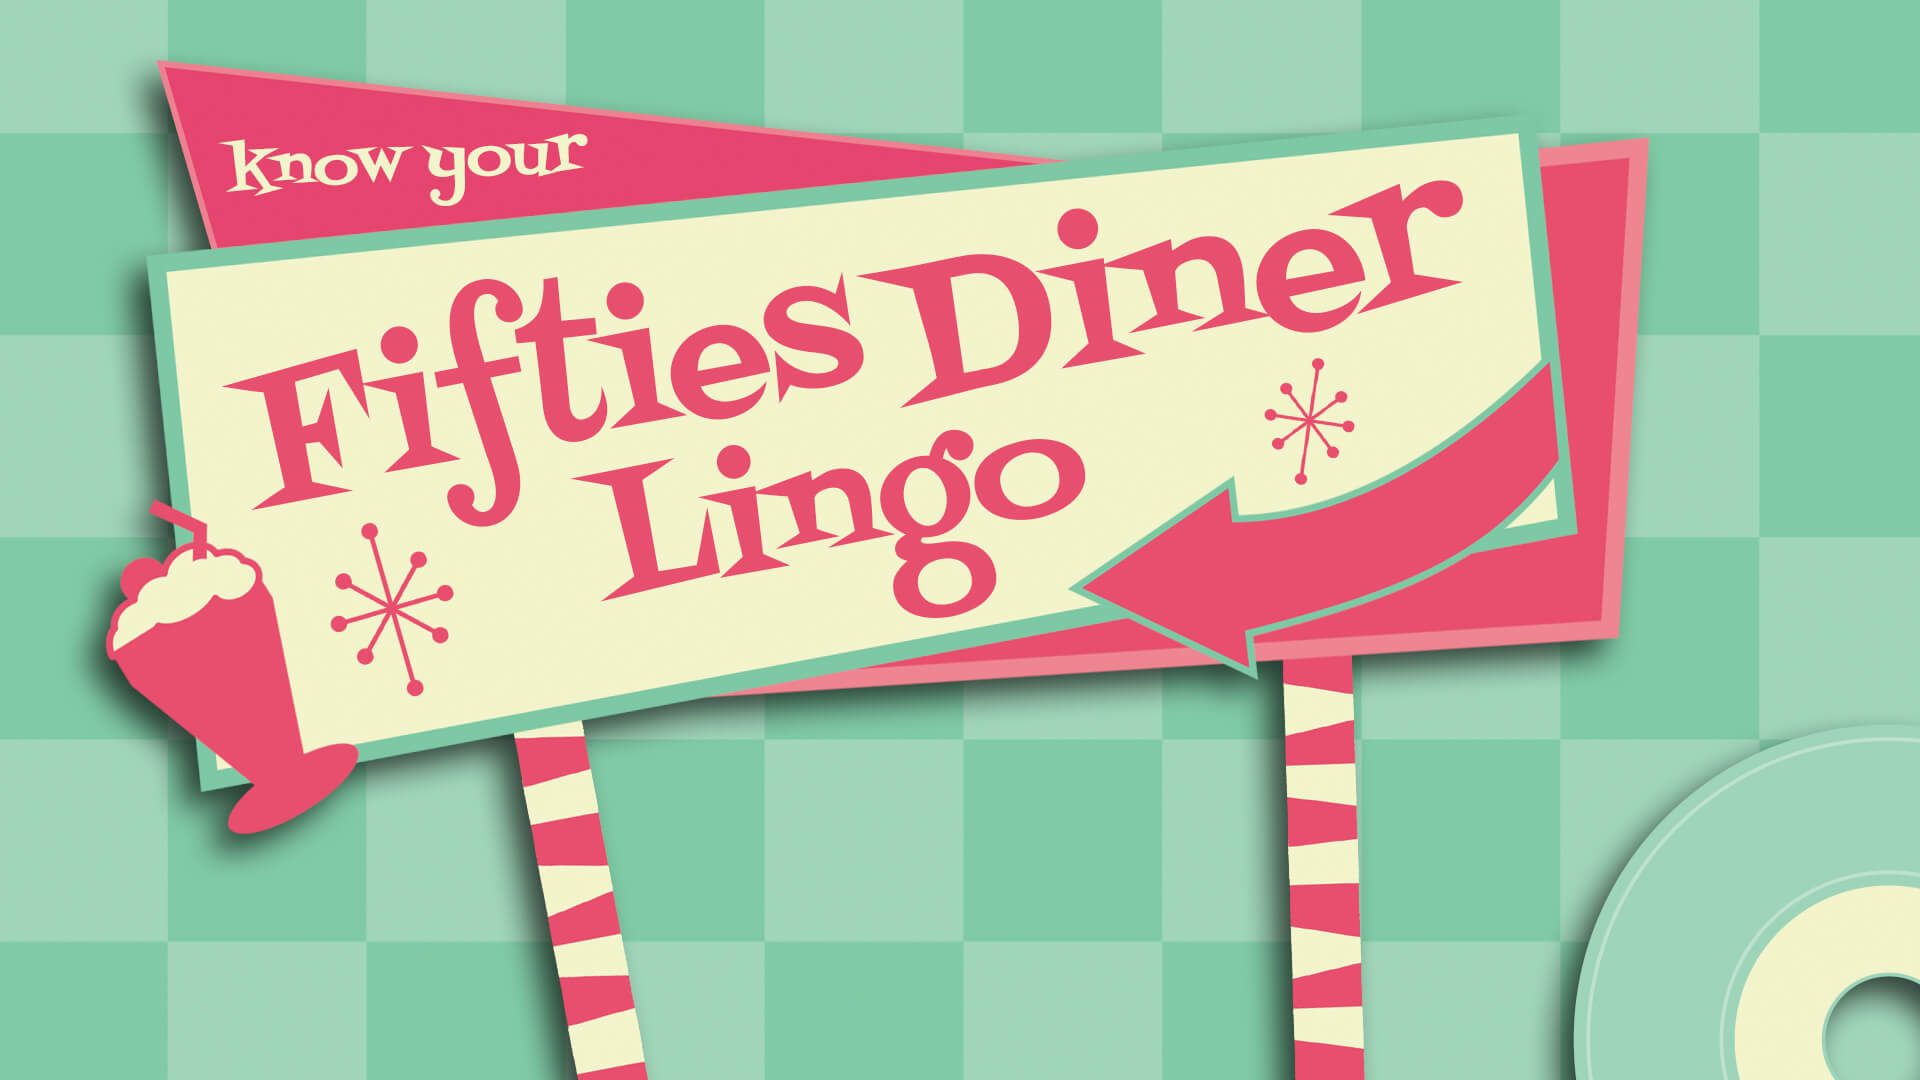 Know Your Fifties Diner Lingo